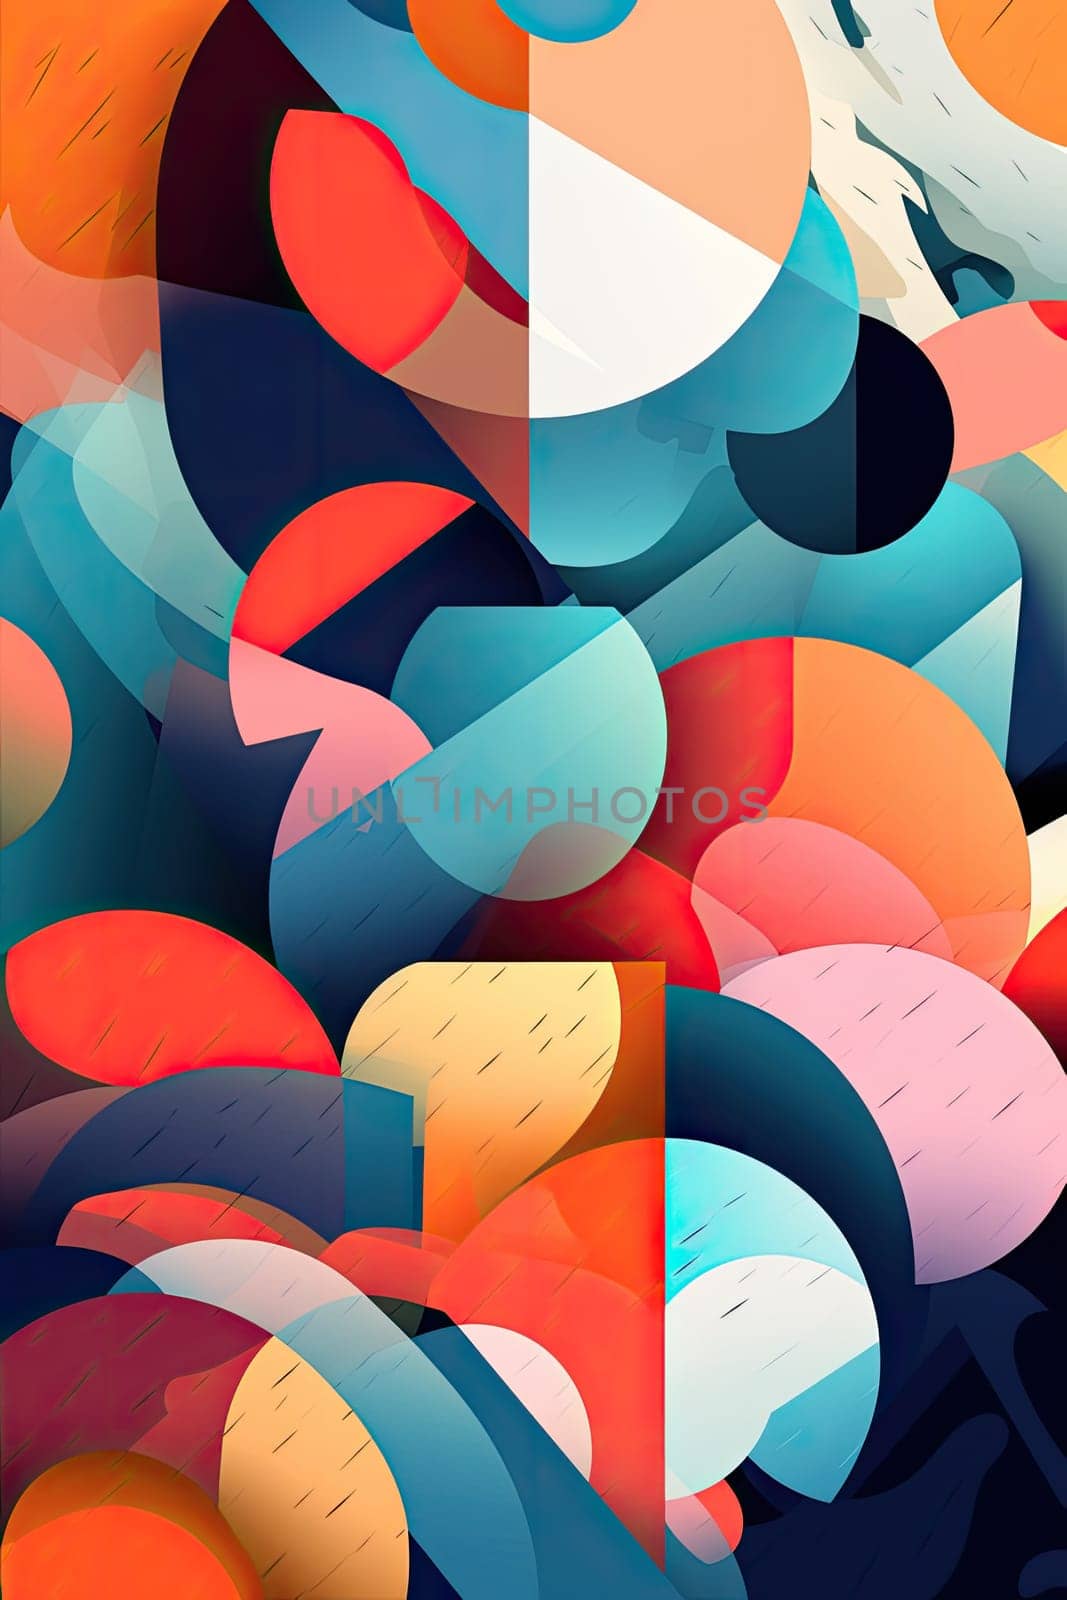 A captivating abstract composition with bold and vibrant shapes merging together by simakovavector